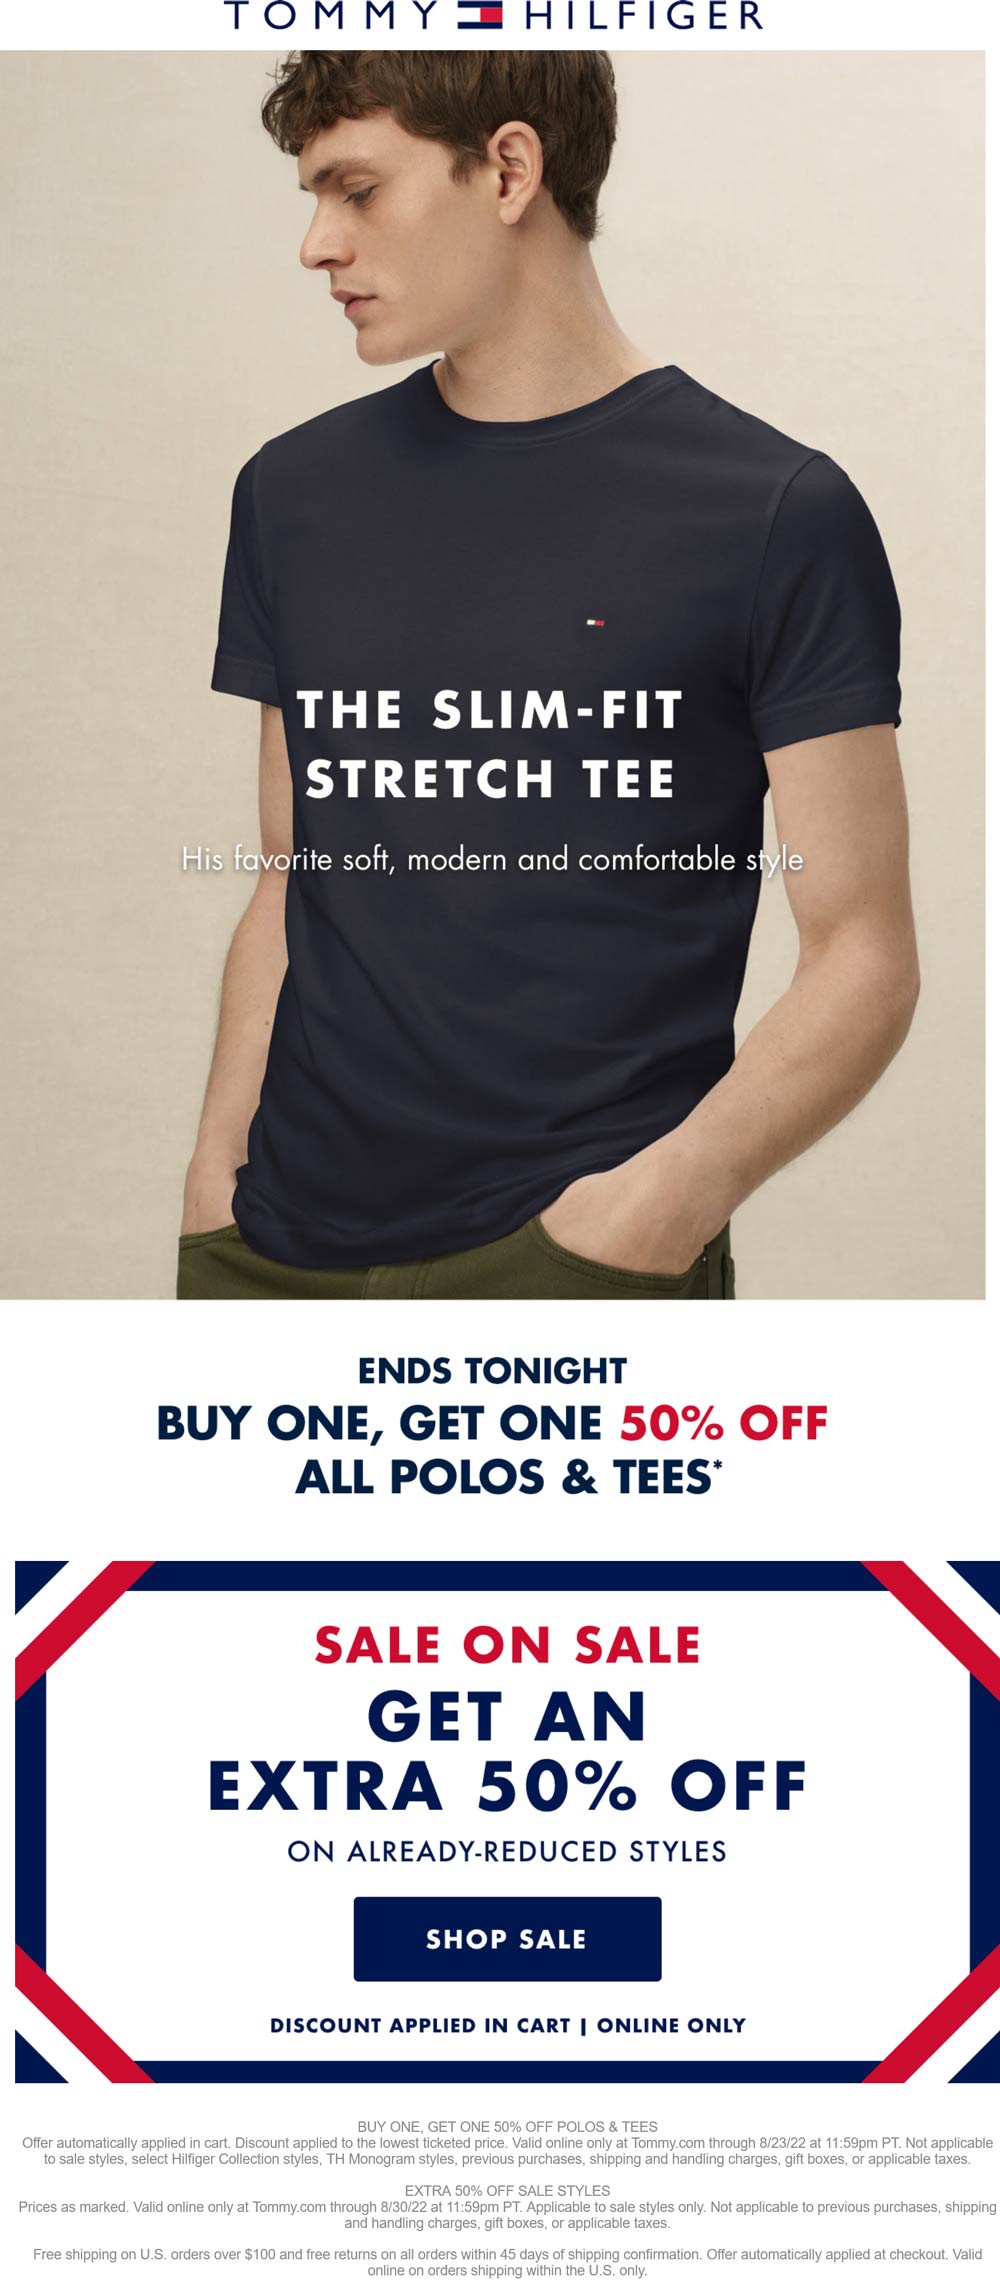 Tommy Hilfiger stores Coupon  Second polo or tee 50% off today at Tommy Hilfiger #tommyhilfiger 